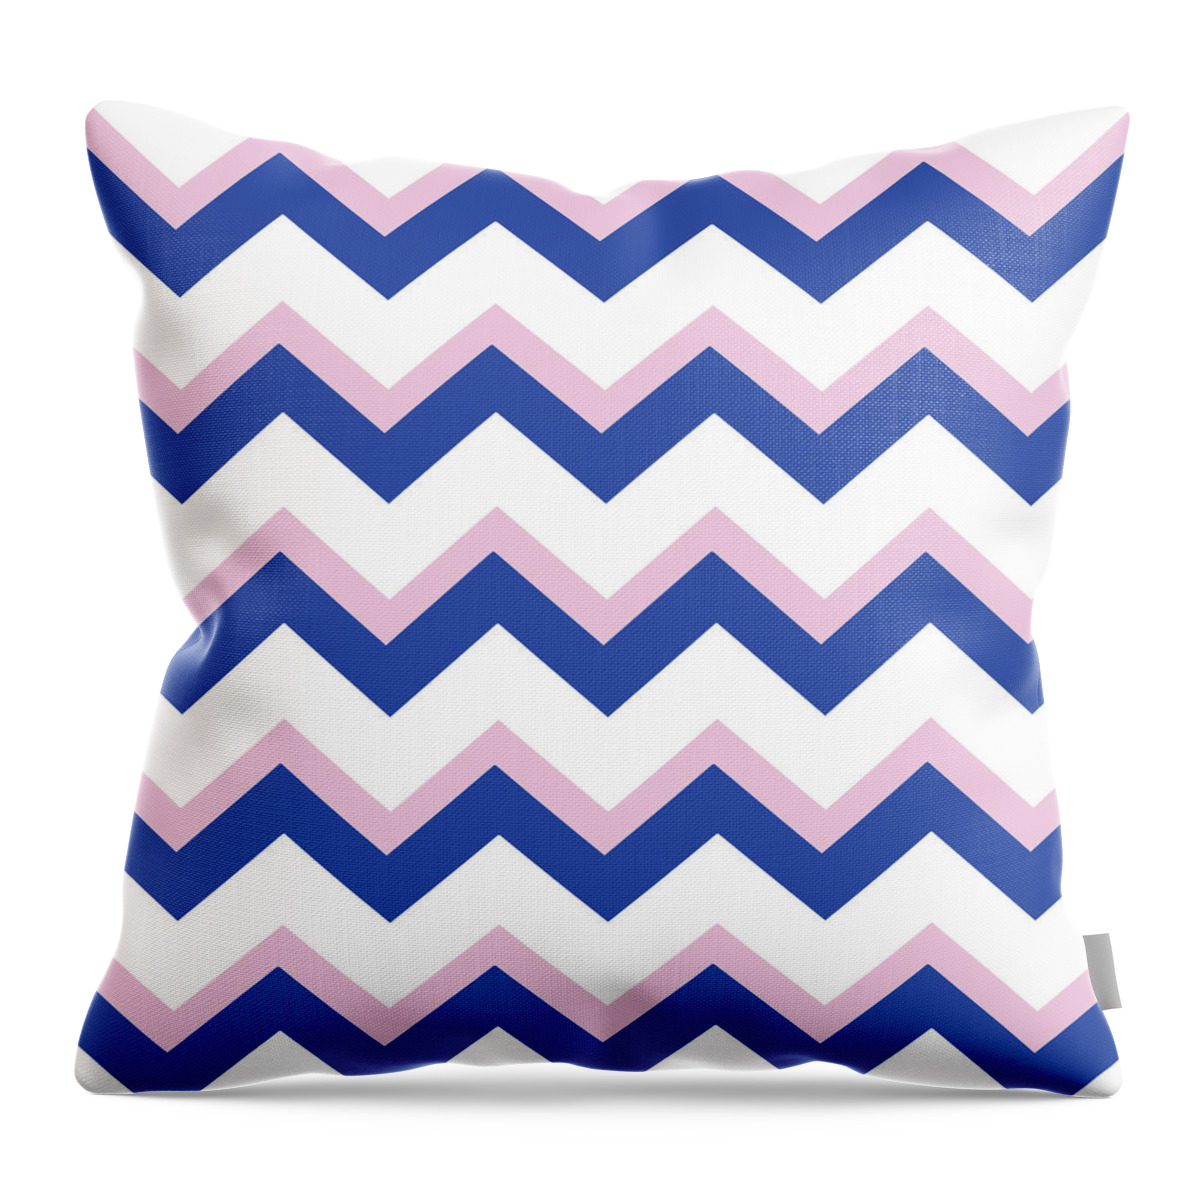 Chevron Throw Pillow featuring the mixed media Pink Blue Chevron Pattern by Christina Rollo